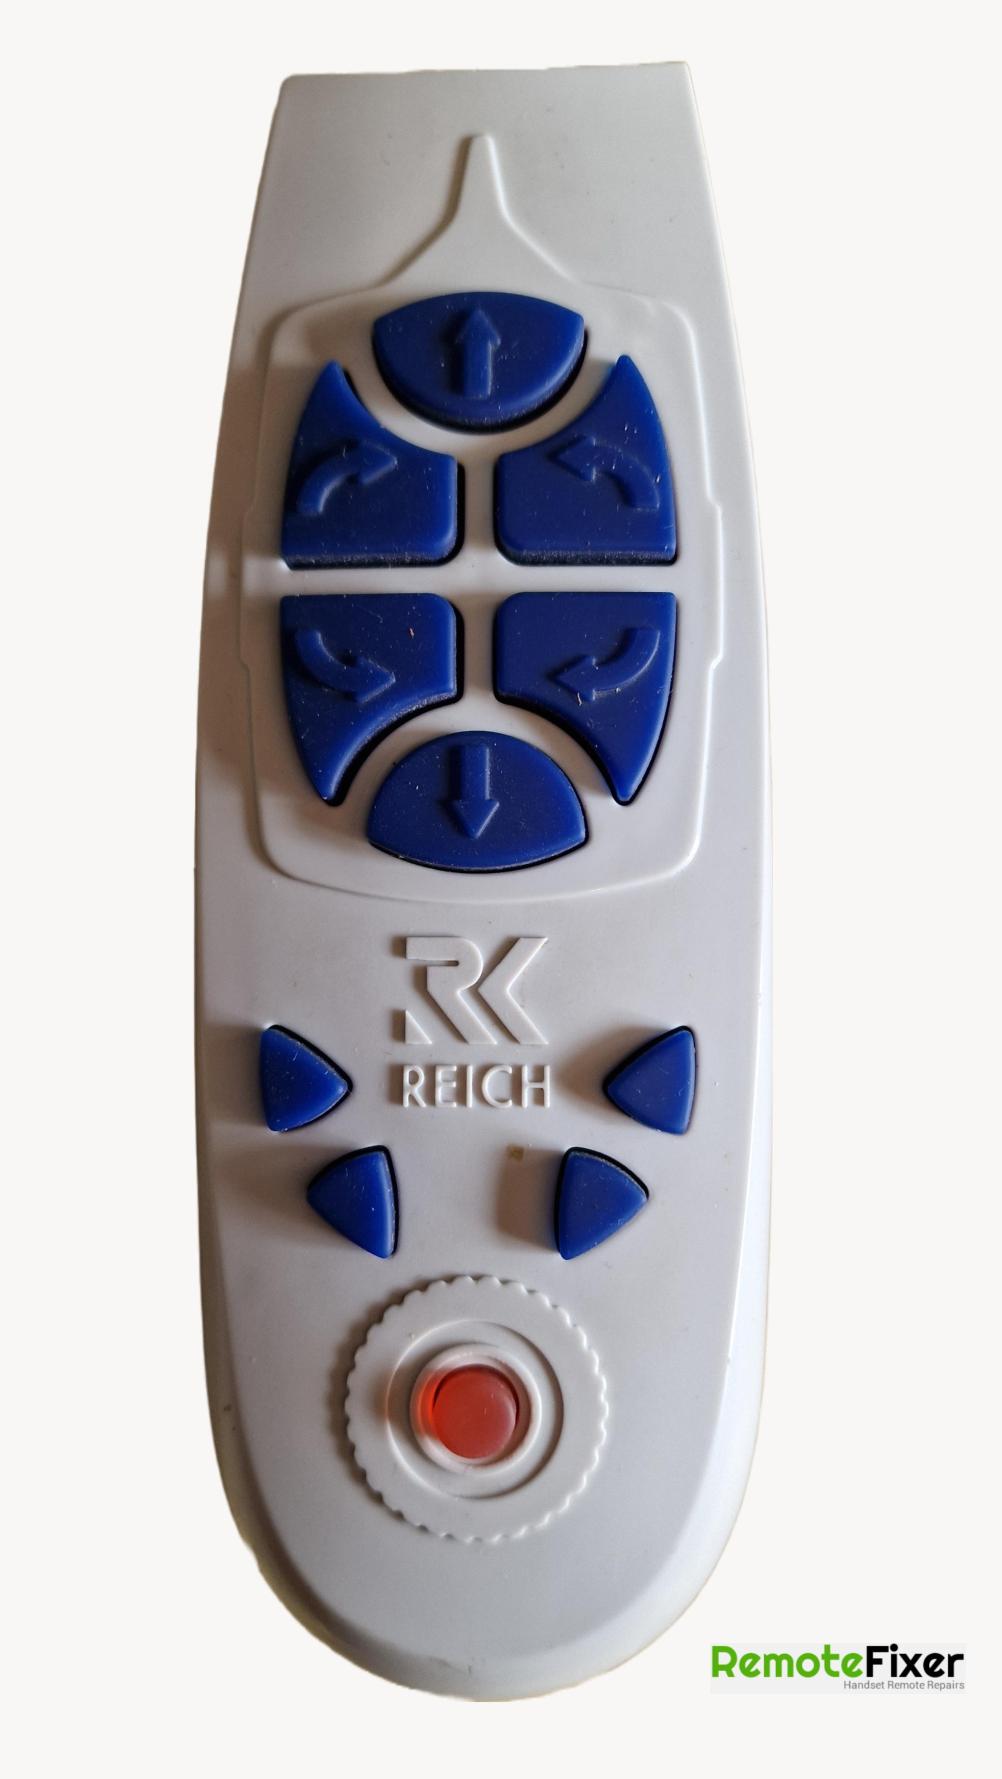 Riech mover control  Remote Control - Front Image